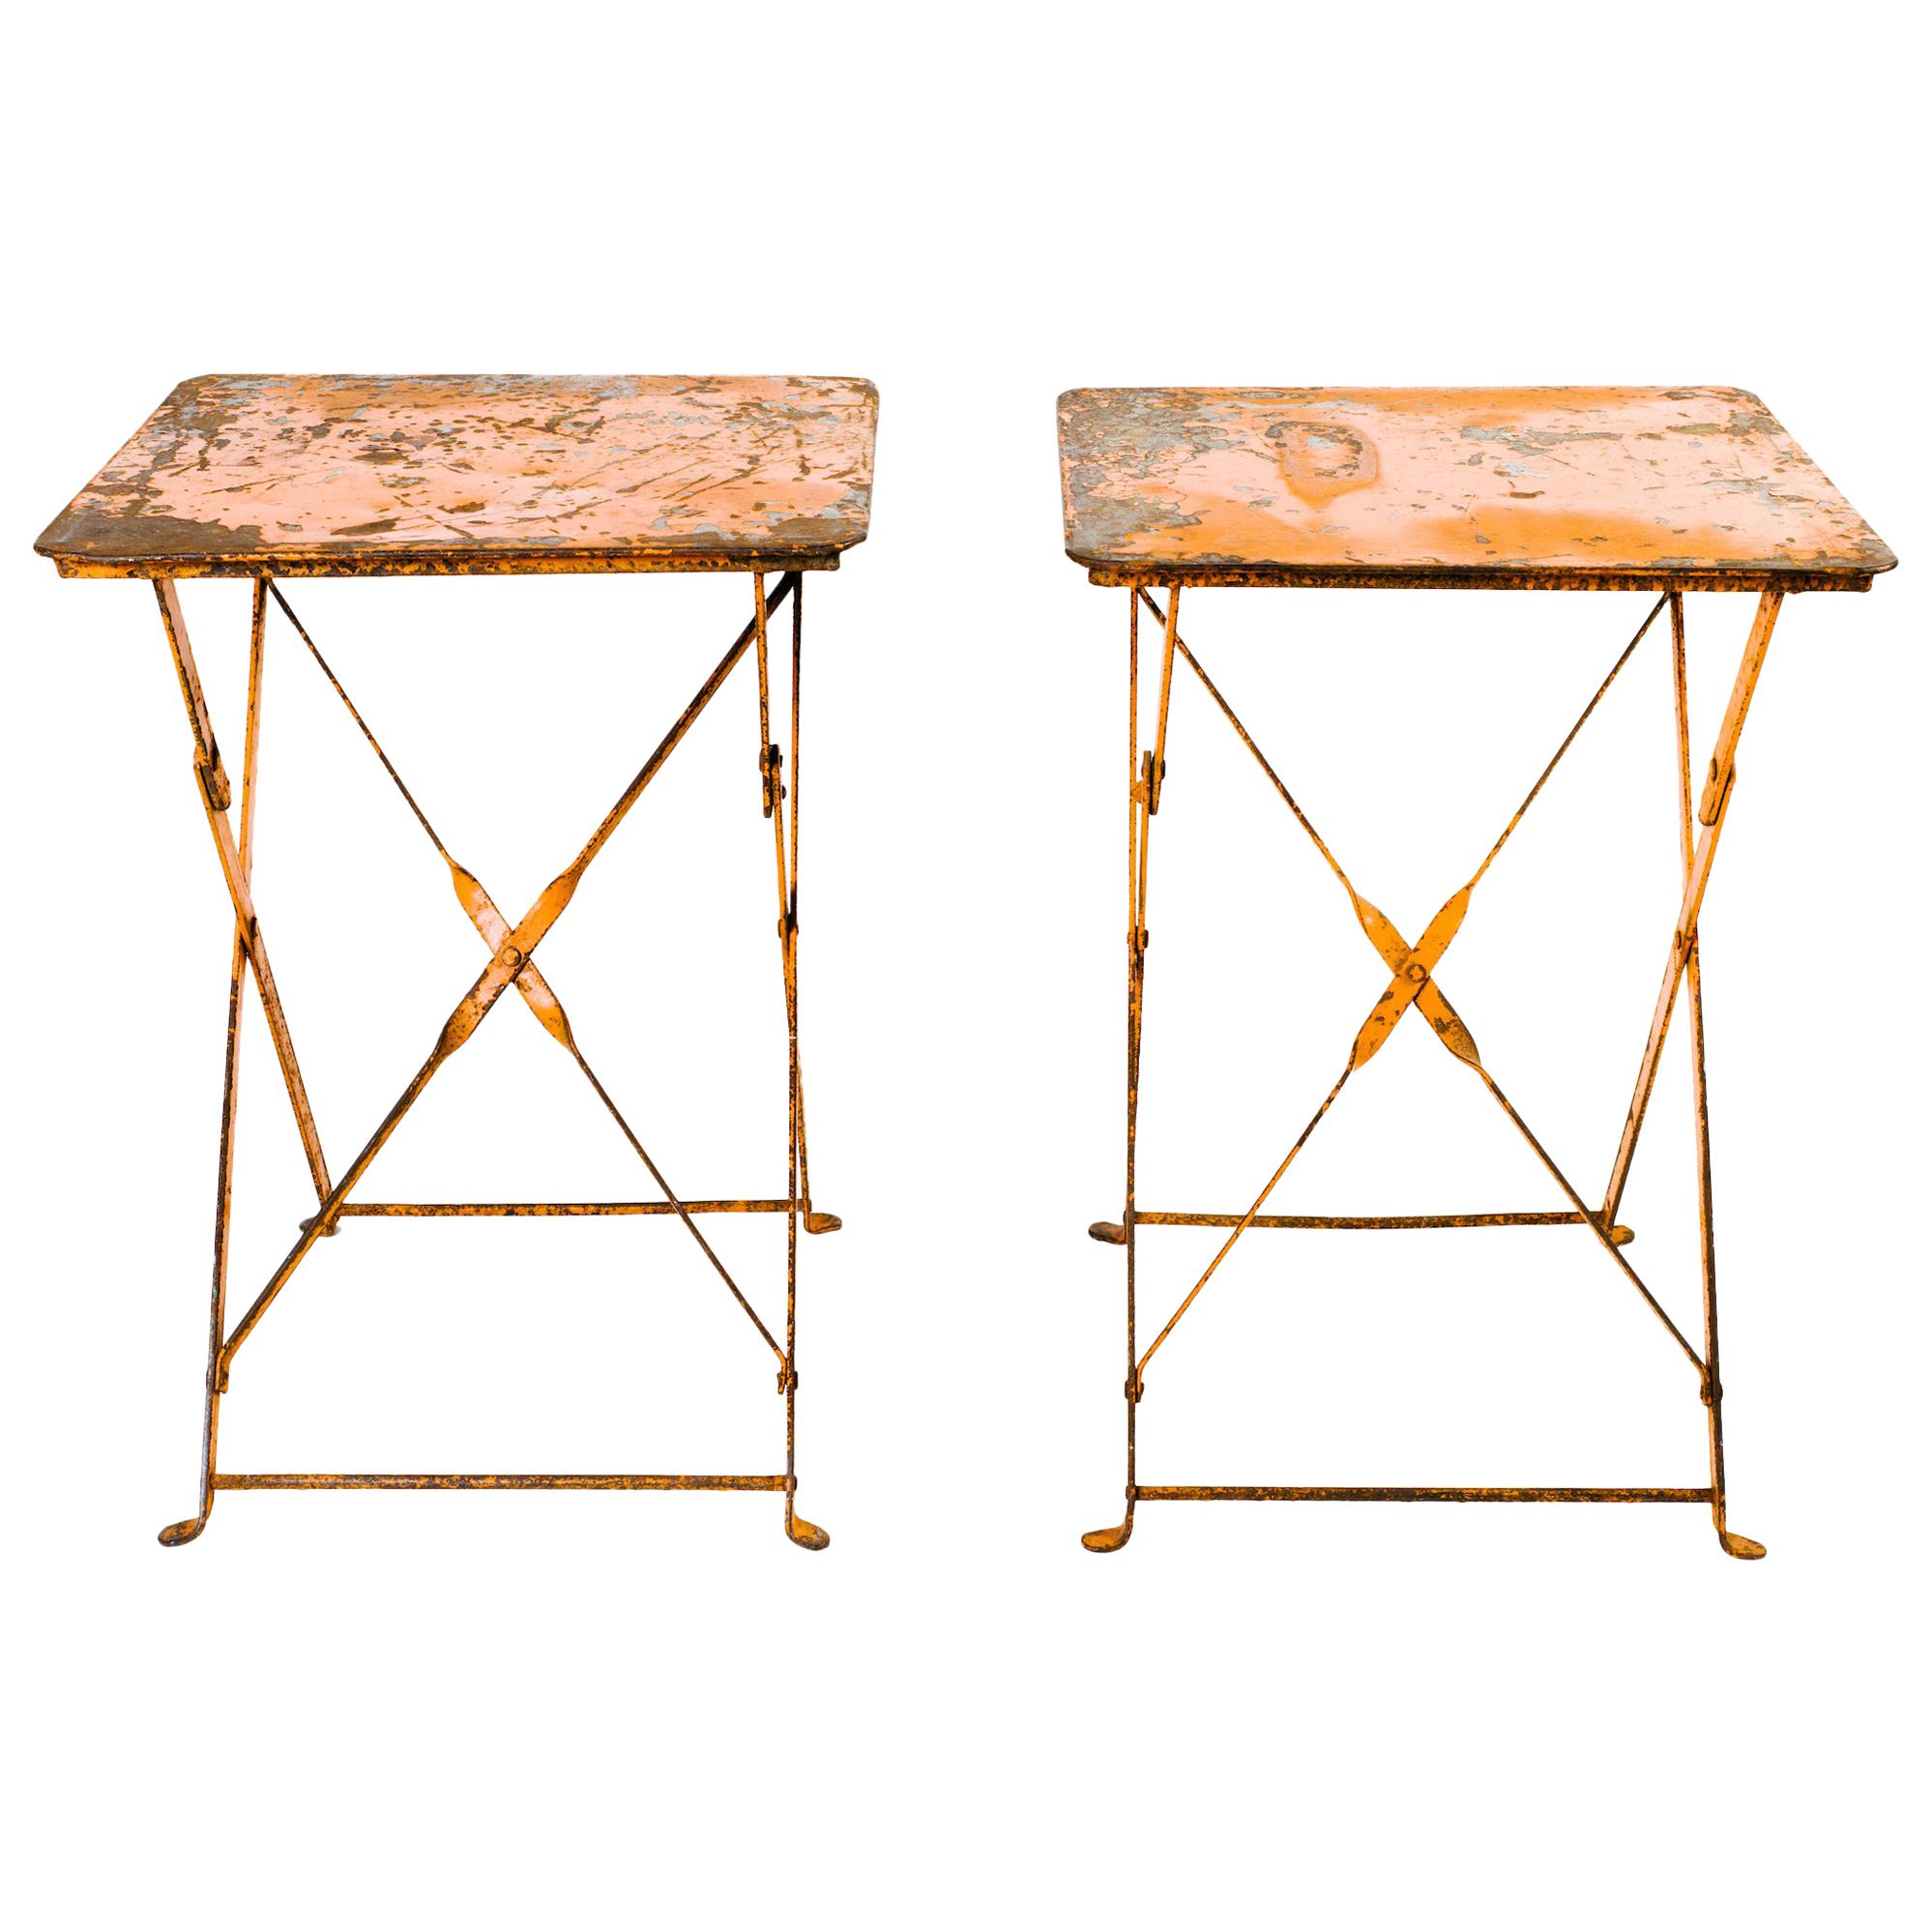 Pair of industrial French folding iron bistro tables with beautiful patina on the metal and original orange enamel paint. Exhibits wear and distress on the paint throughout, adding to their rustic charm and beauty. Can be used indoors as side tables